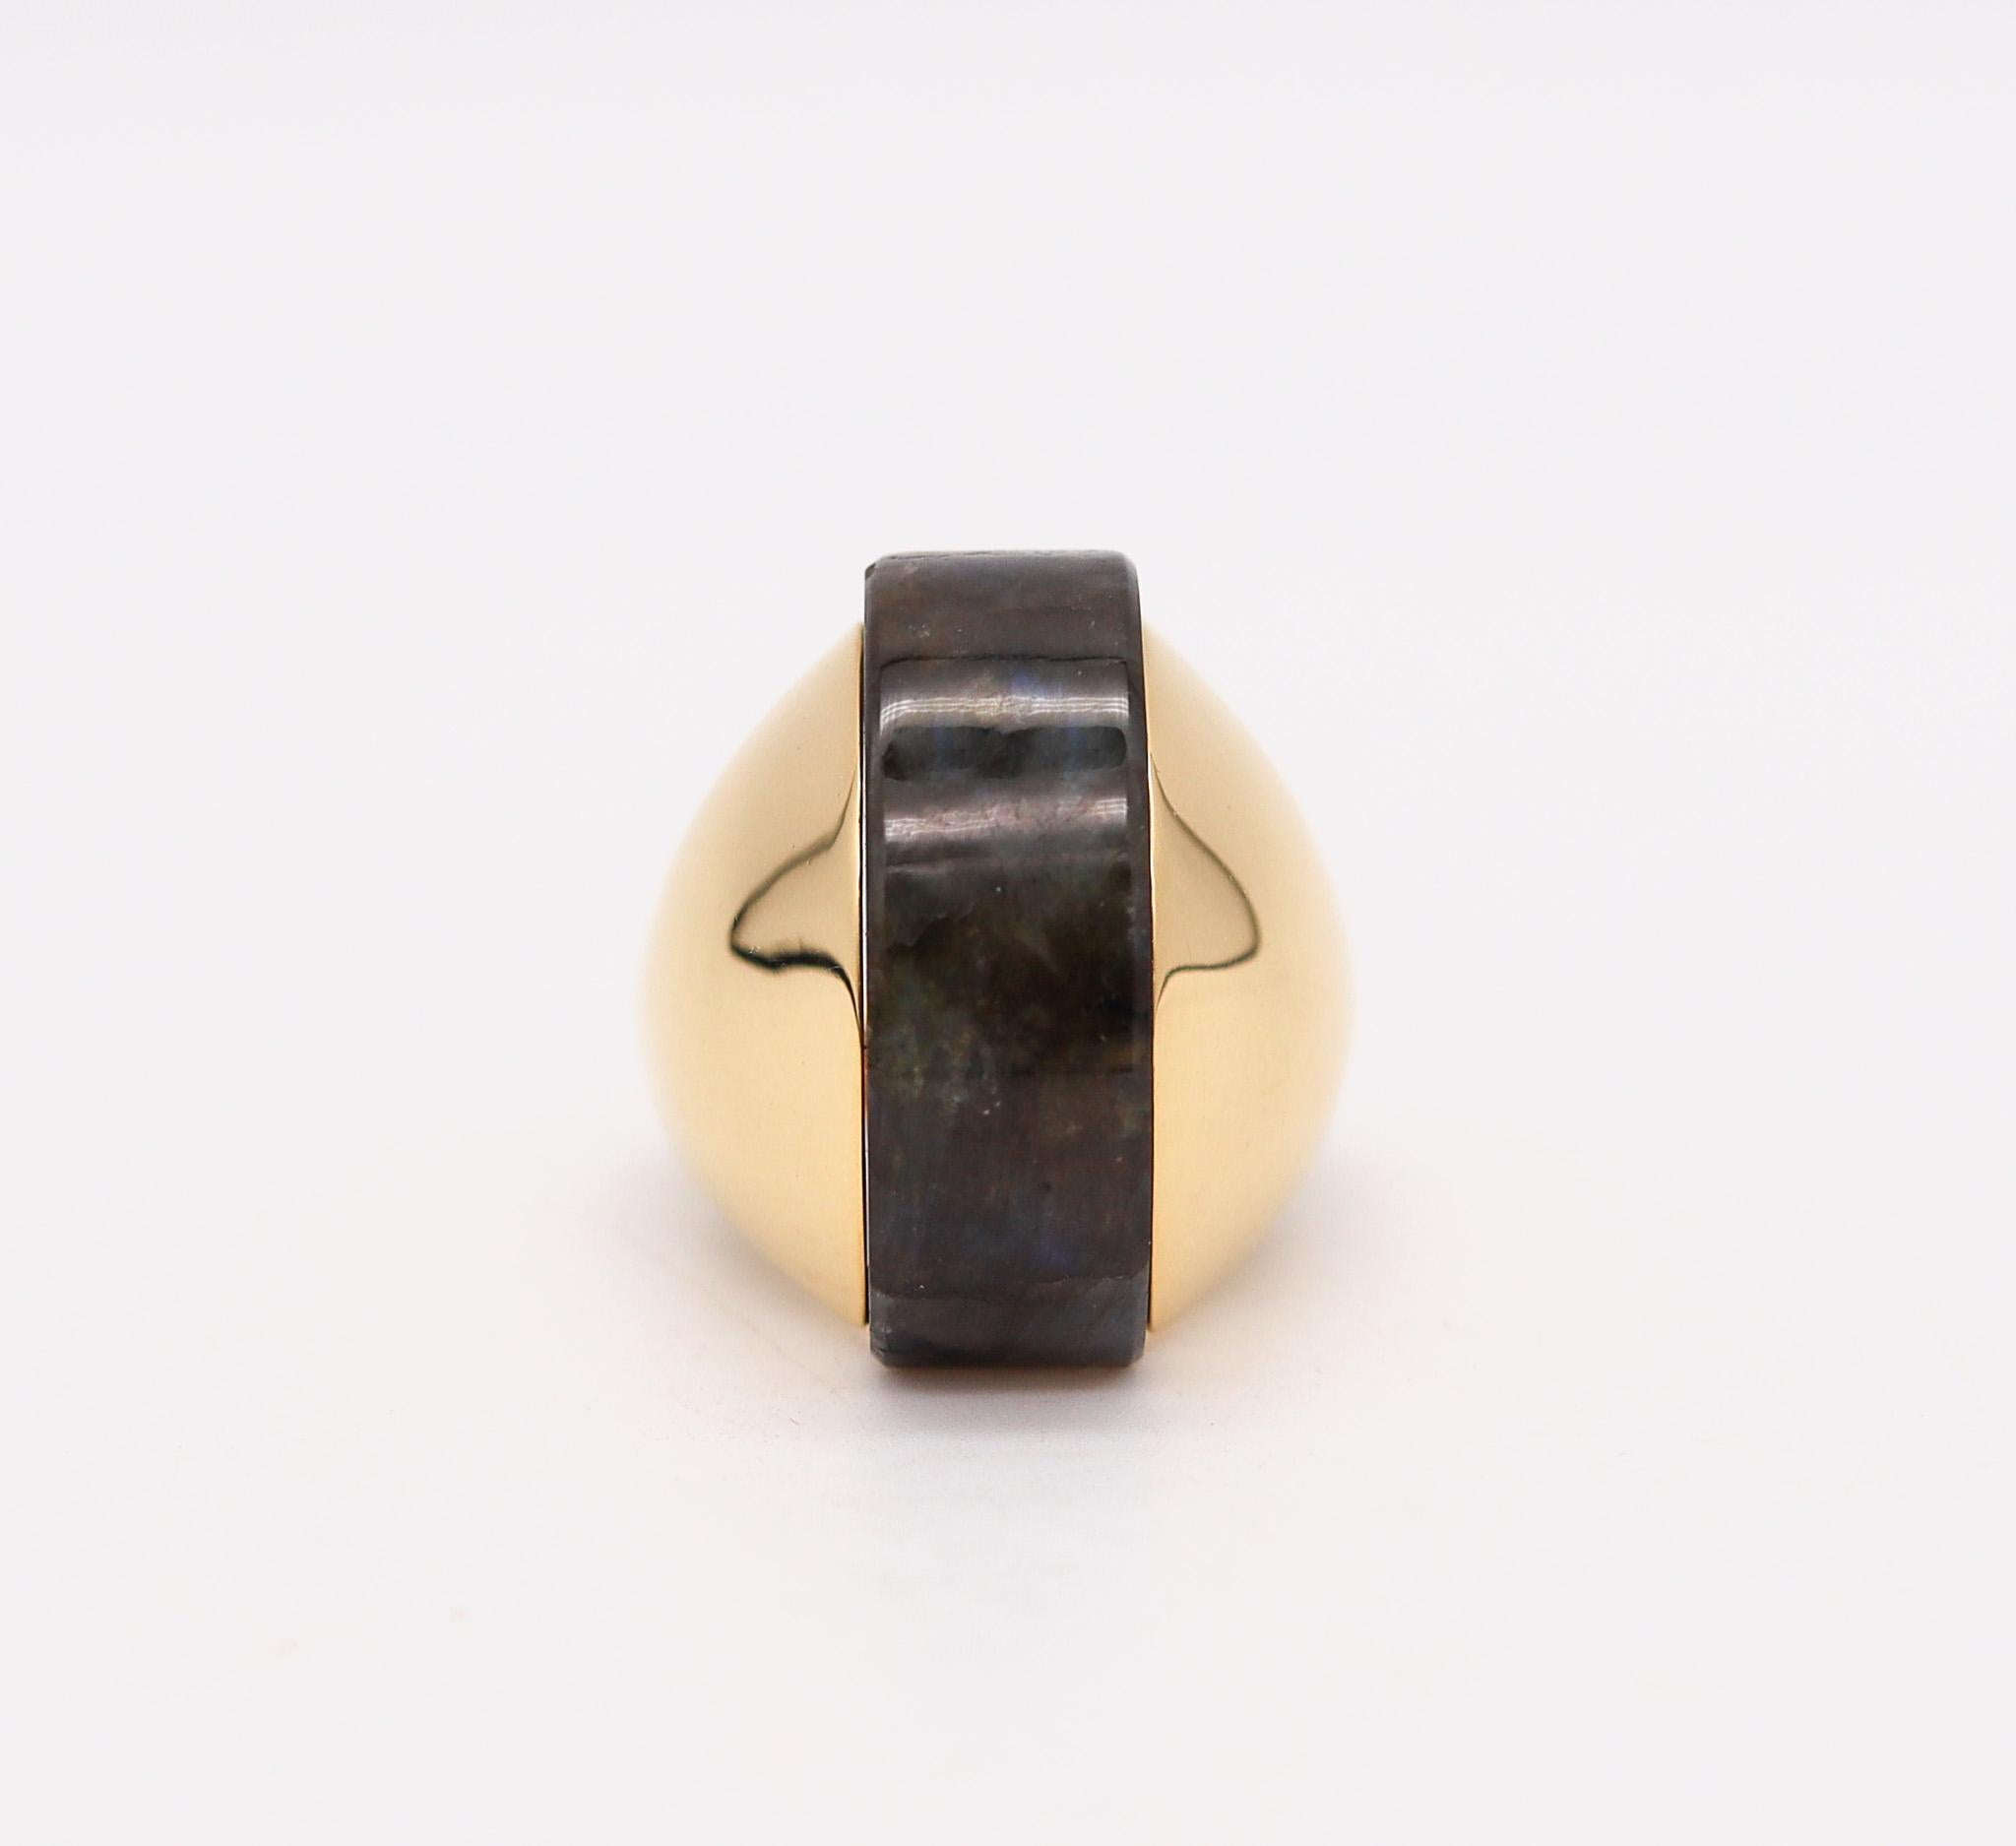 Geometric ring designed by the Aletto Brothers.

A contemporary geometric cocktail ring, created by the Italo-American jewelry designers Aletto Brothers. This cocktail ring has been masterfully crafted in a bombe shape in solid yellow gold of 18